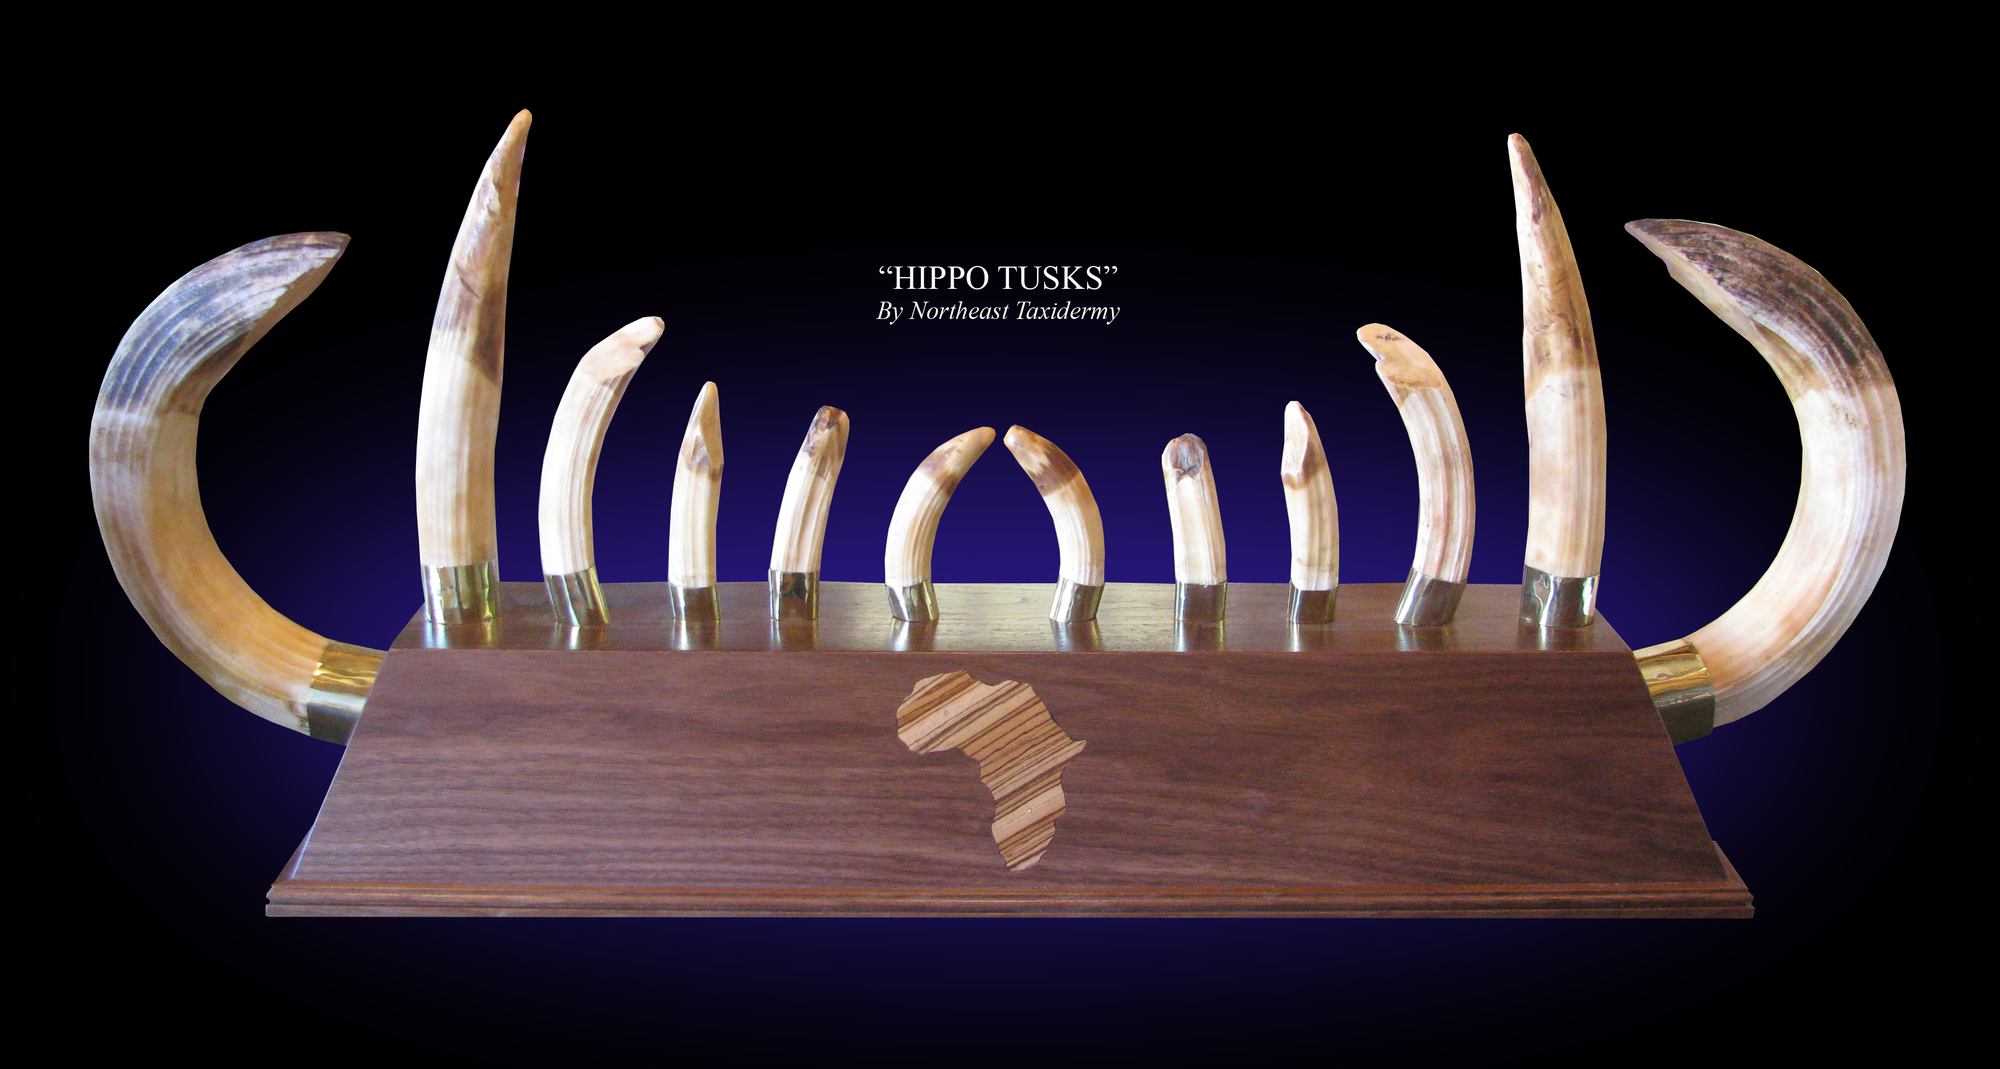 100_6206_HIPPO TUSKS.png